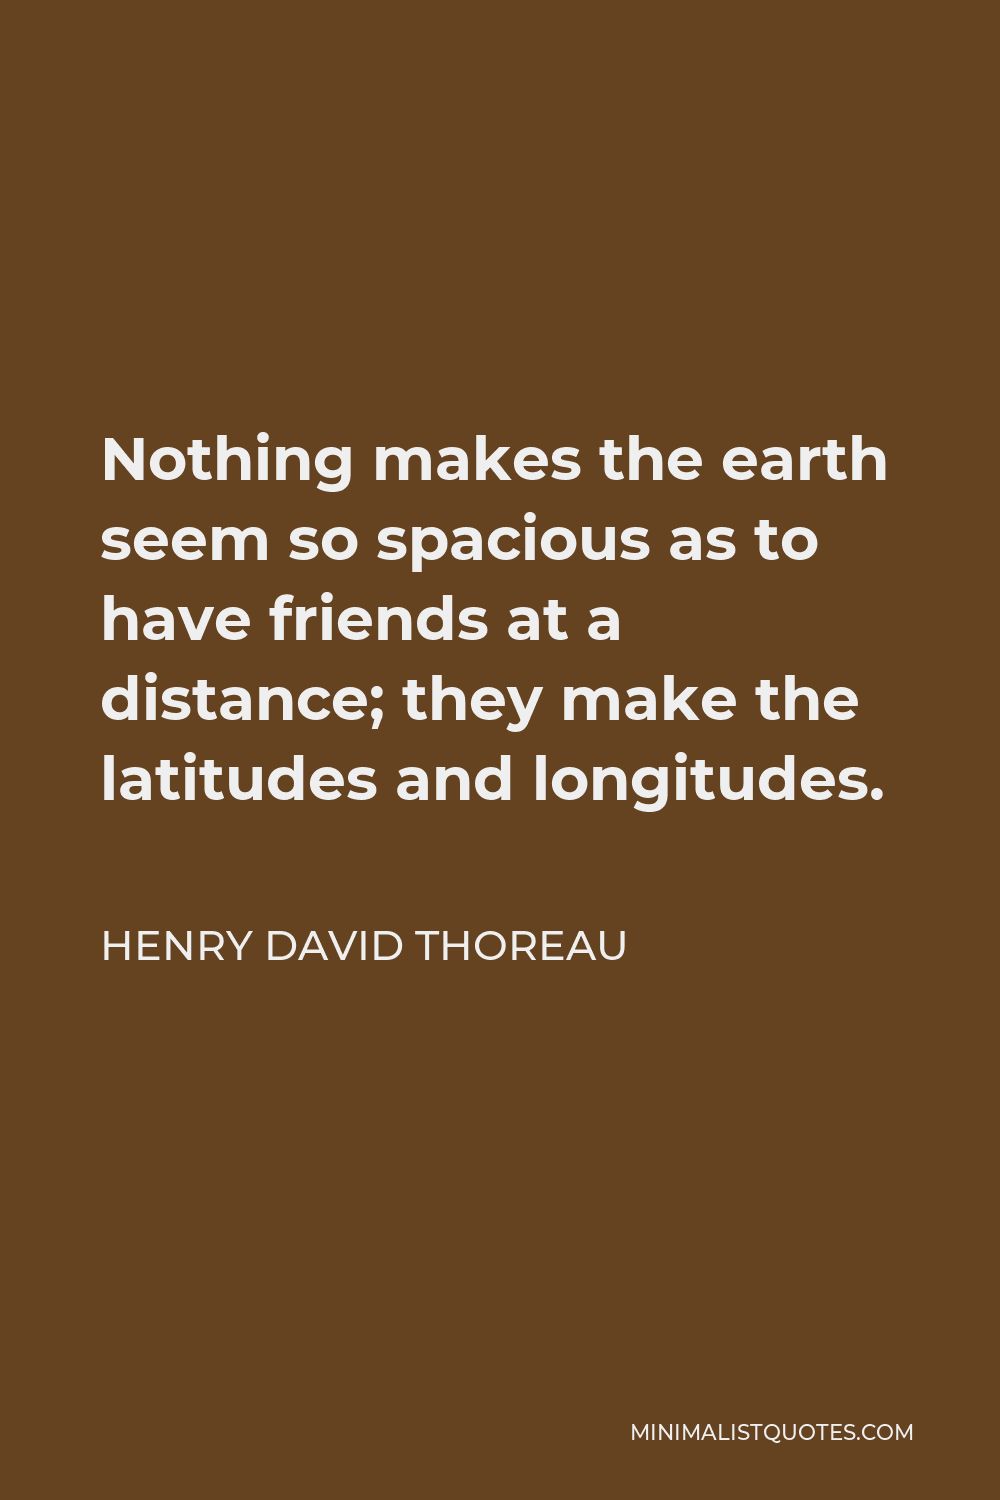 Henry David Thoreau Quote - Nothing makes the earth seem so spacious as to have friends at a distance; they make the latitudes and longitudes.